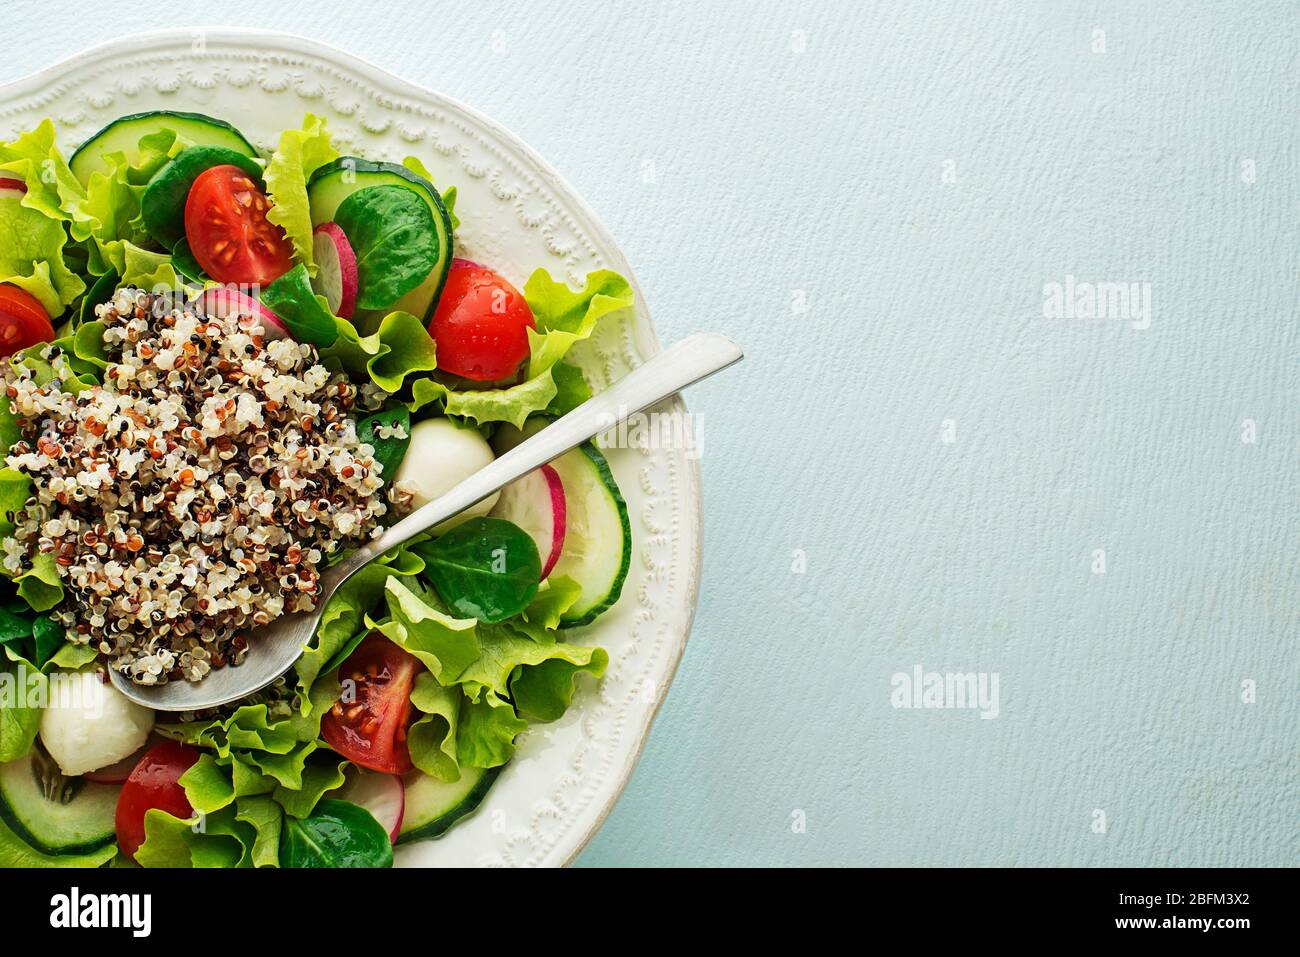 Healthy Green salad with fresh vegetables and quinoa seeds on blue table background Stock Photo